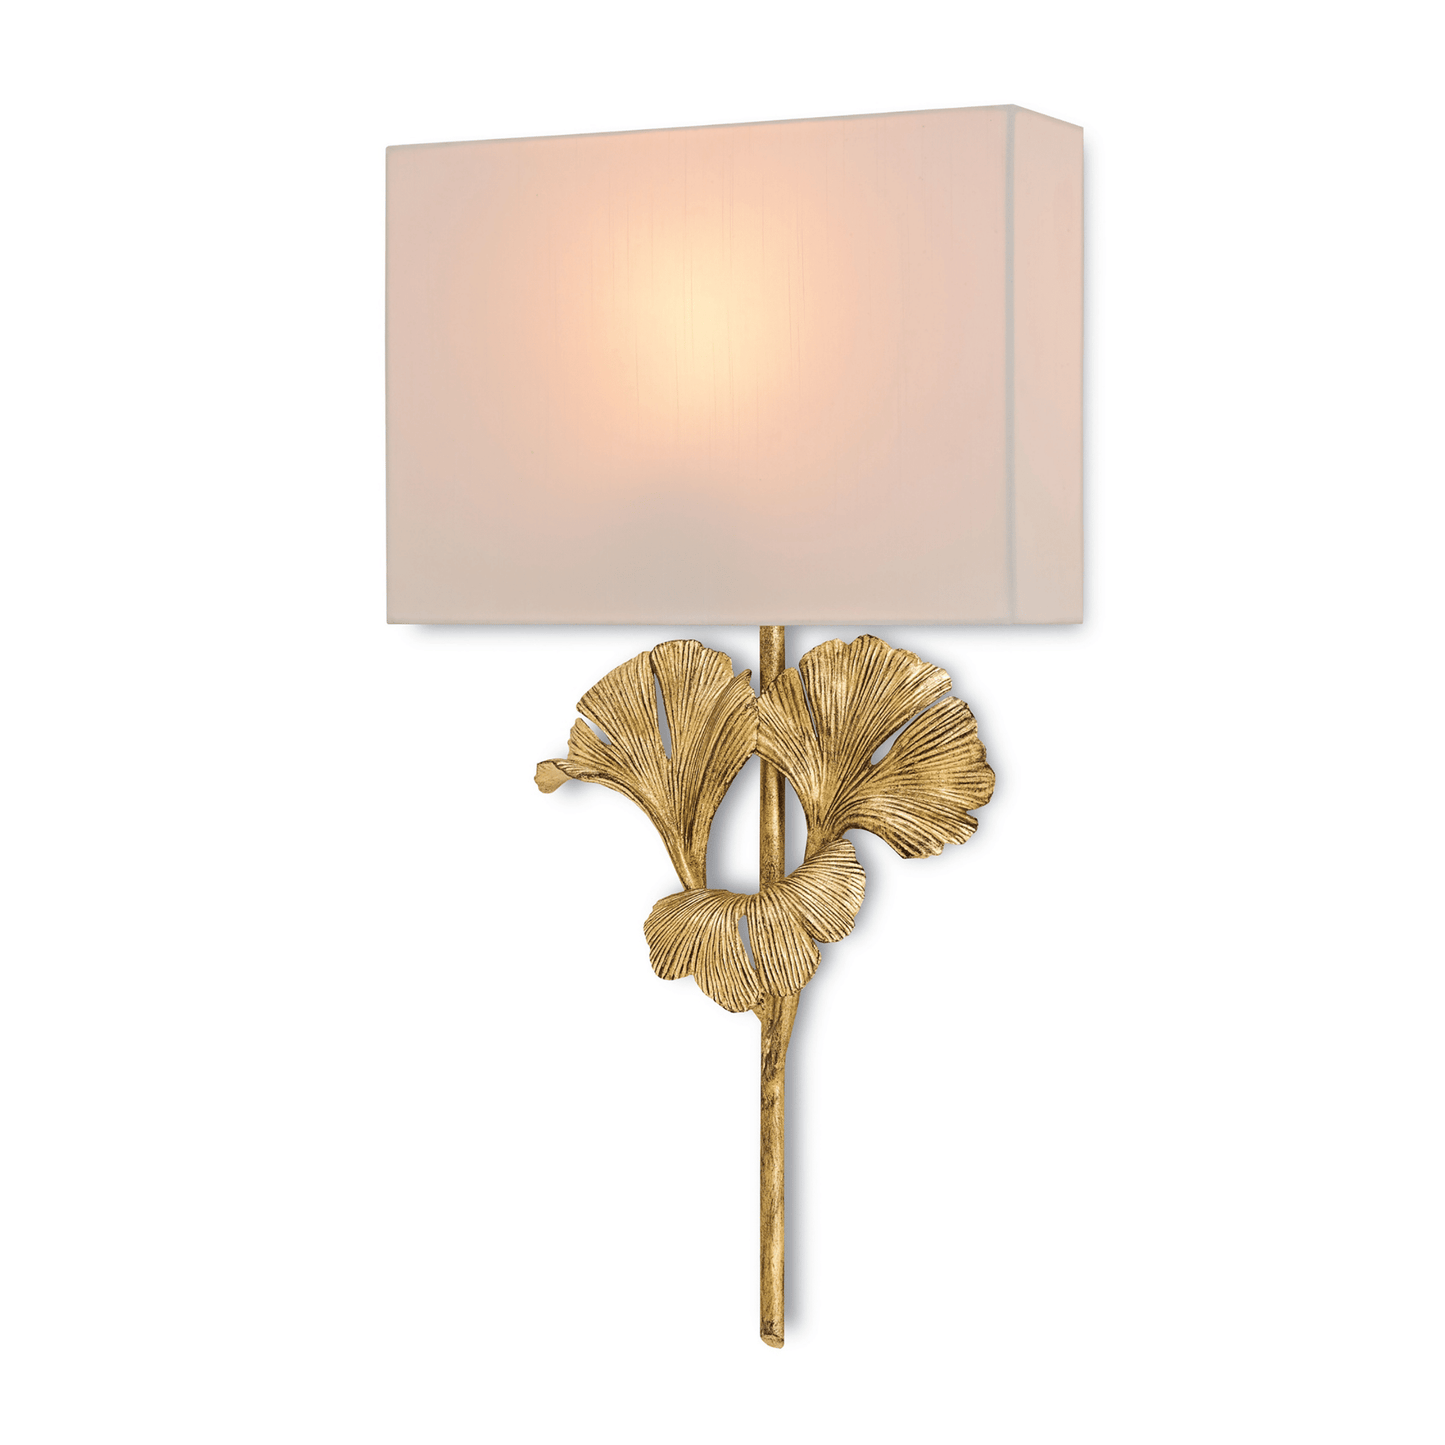 Gingko Silver Wall Sconce H: 25" W: 14" D: 4"